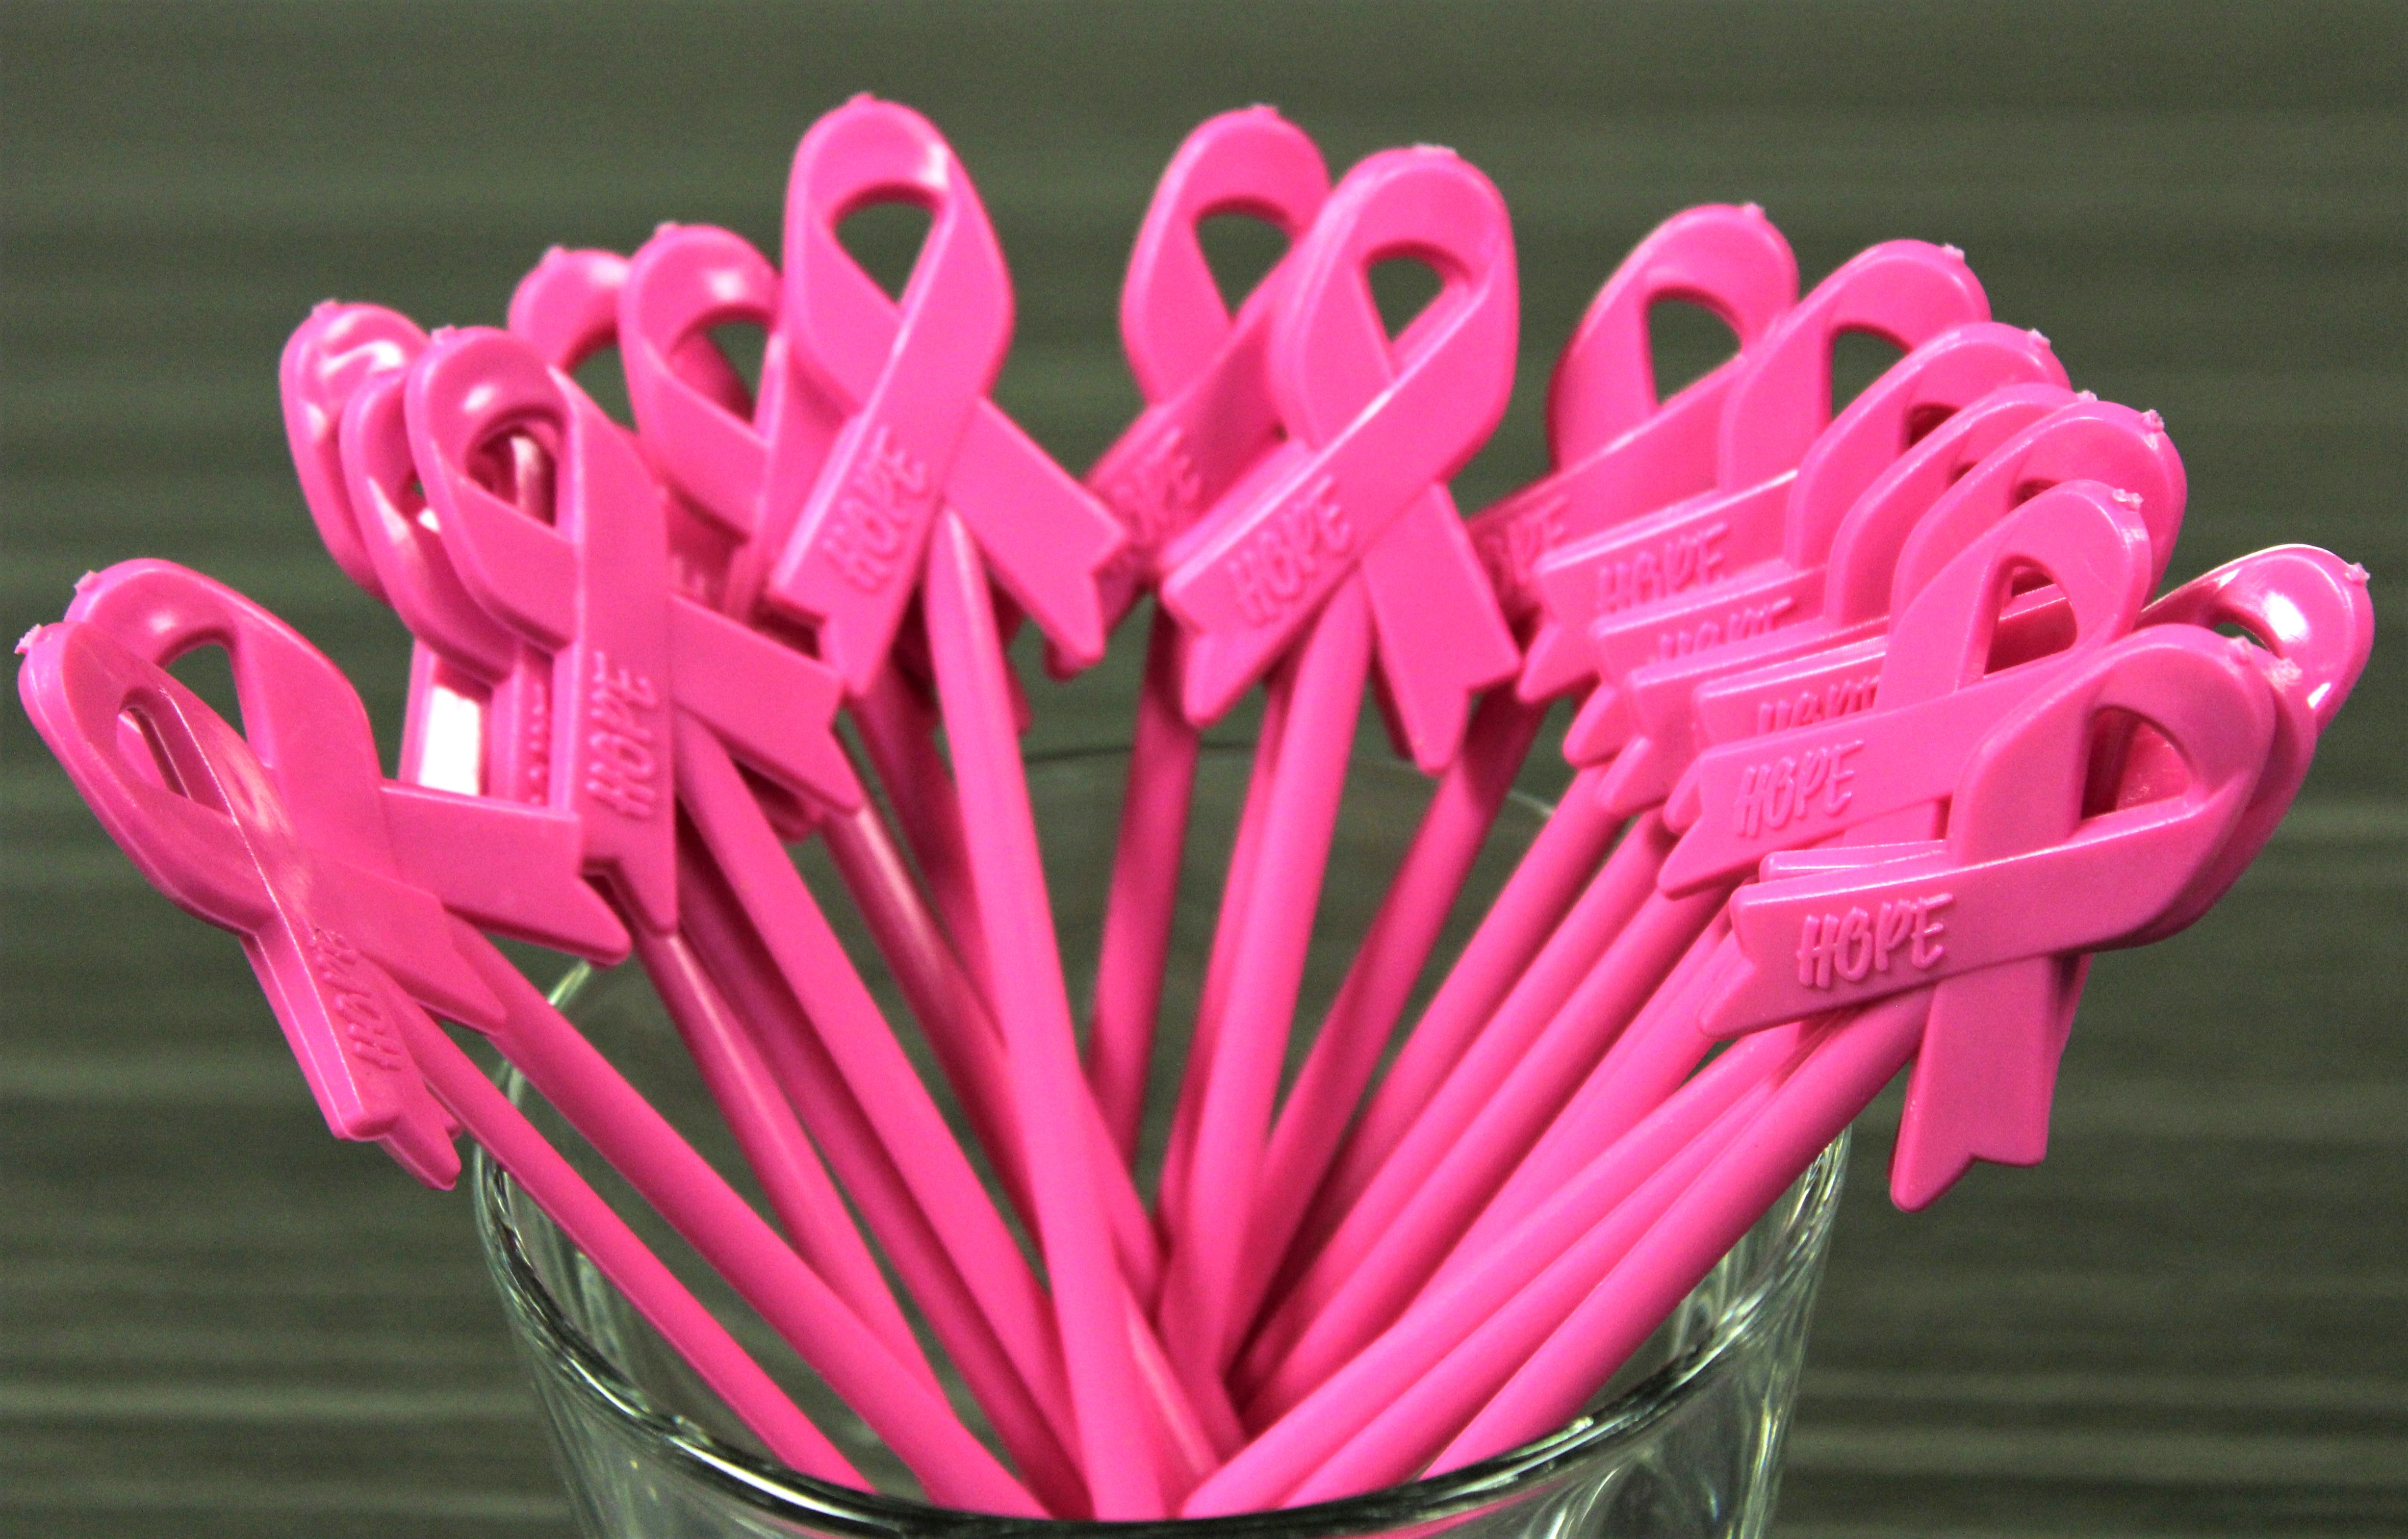 Stanley tapes go pink to support breast cancer patients